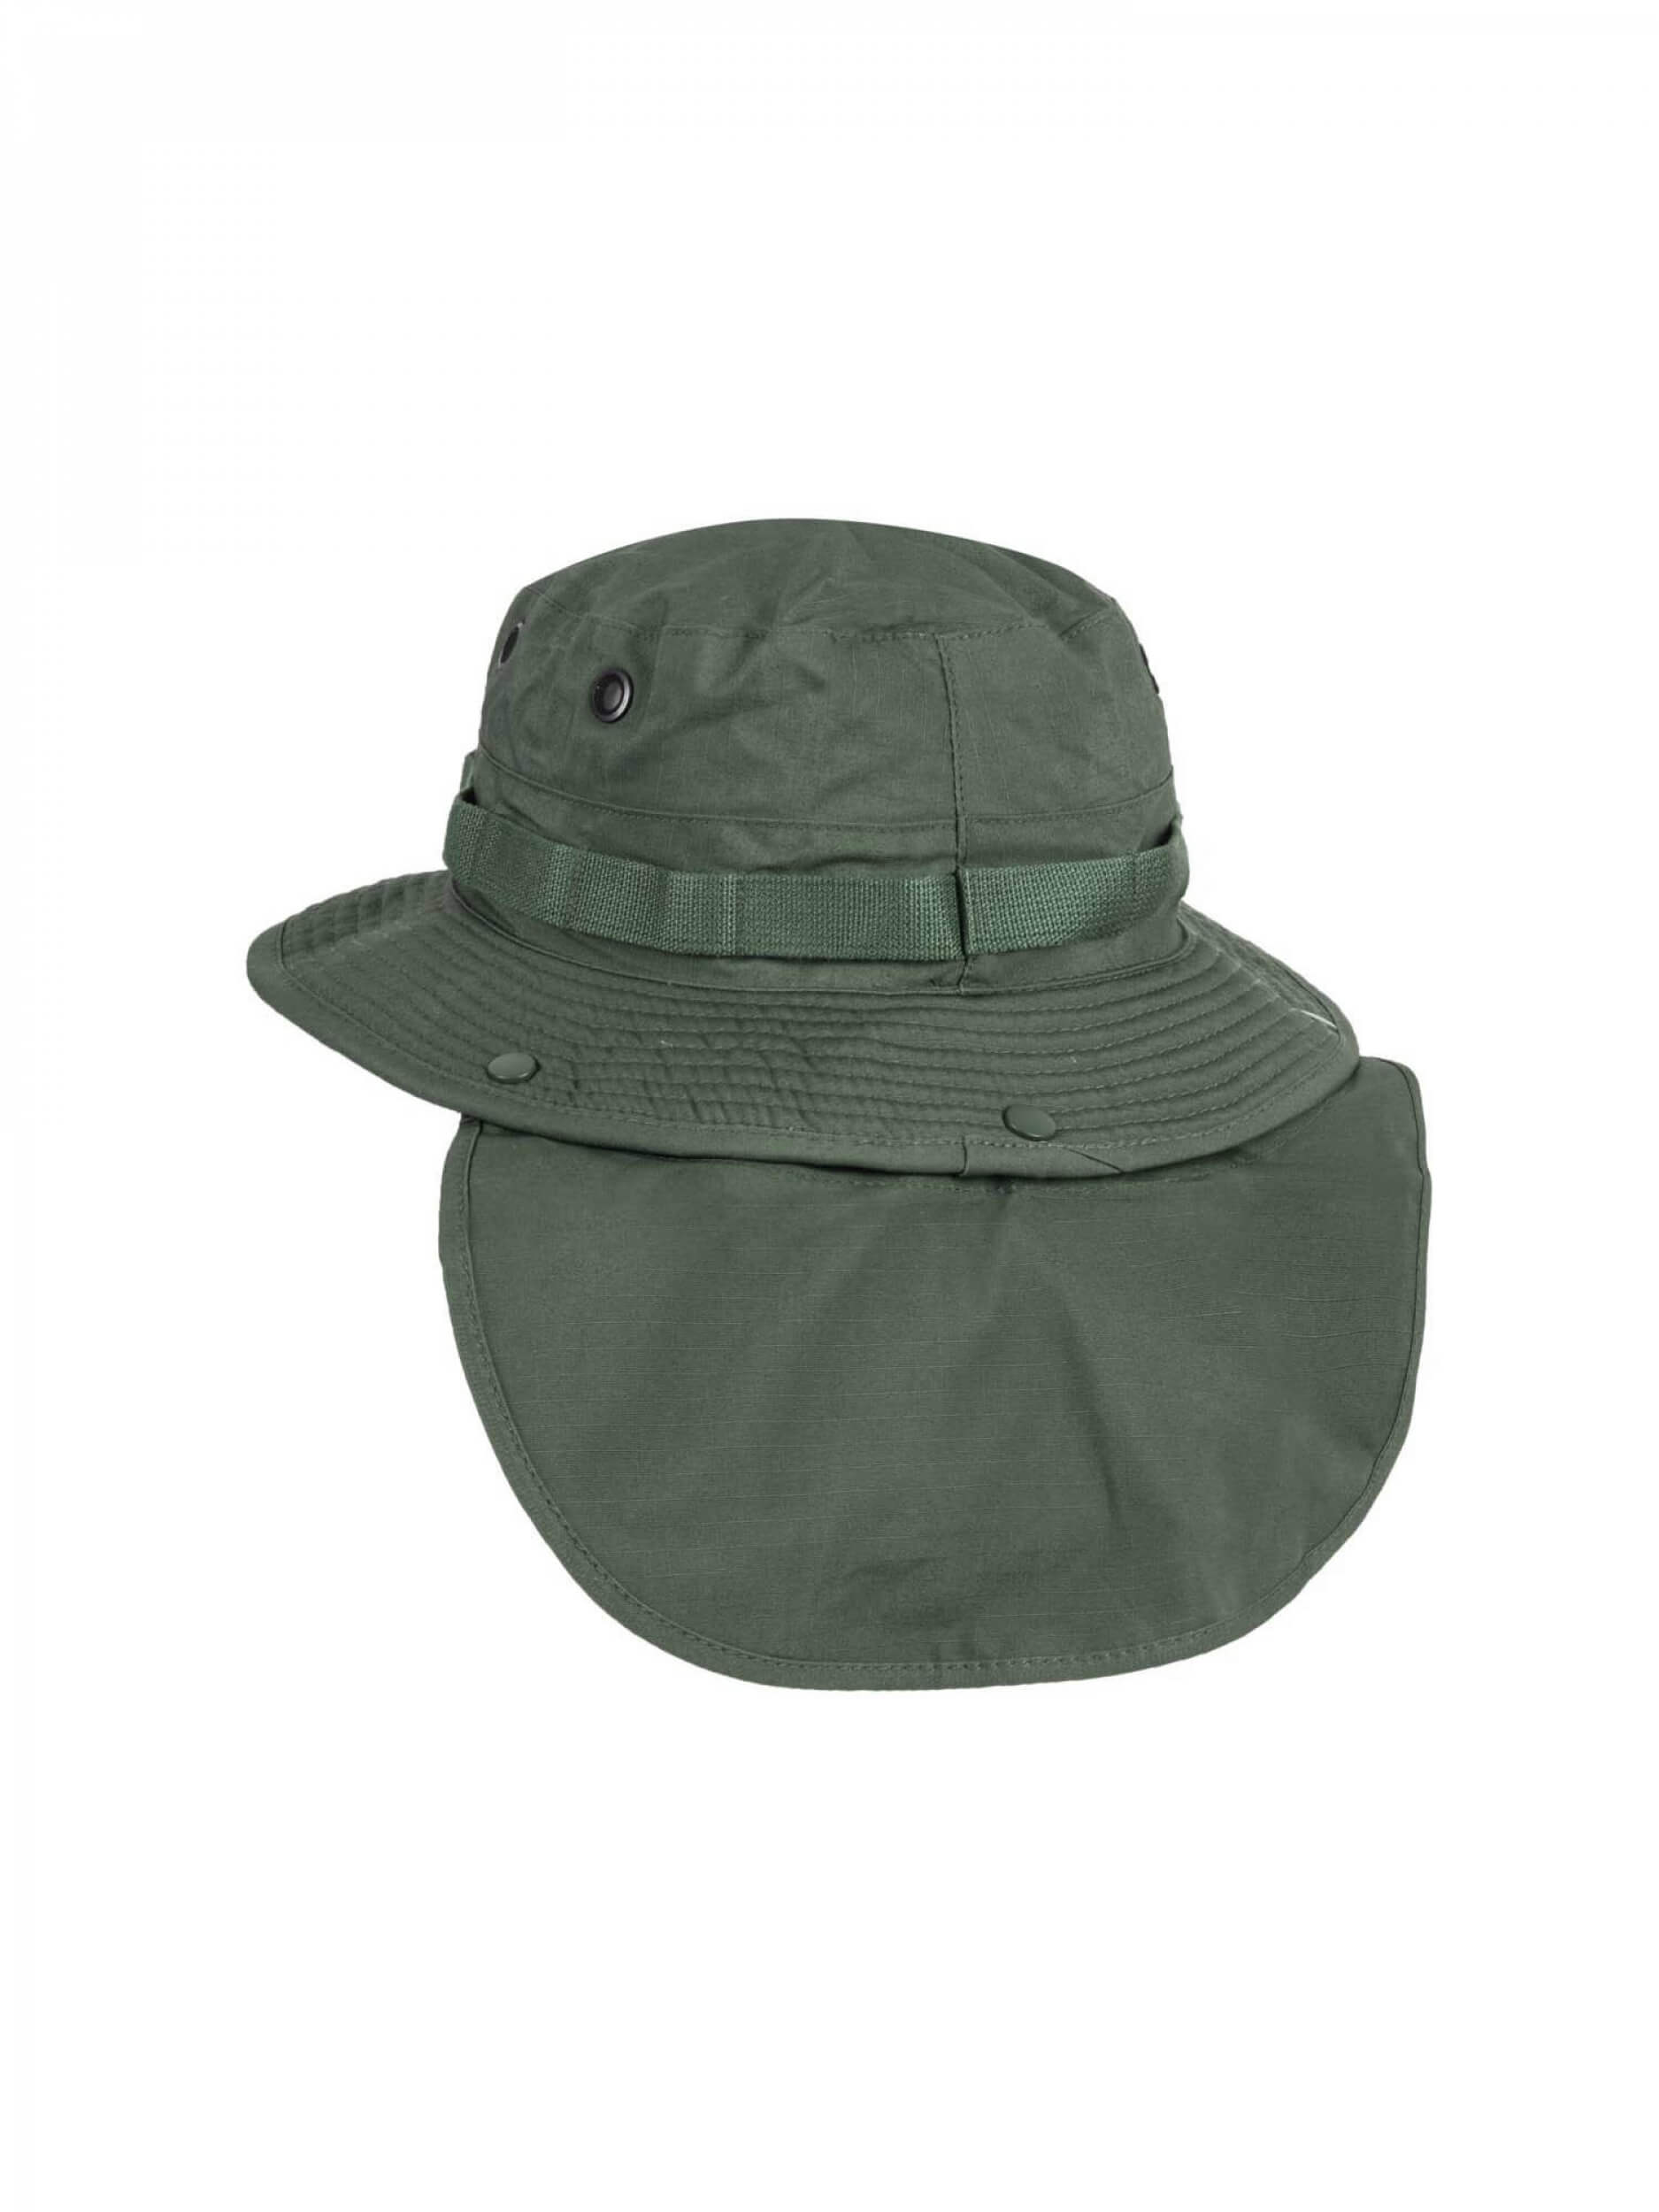 Helikon-Tex Boonie Hat Ripstop Olive Green